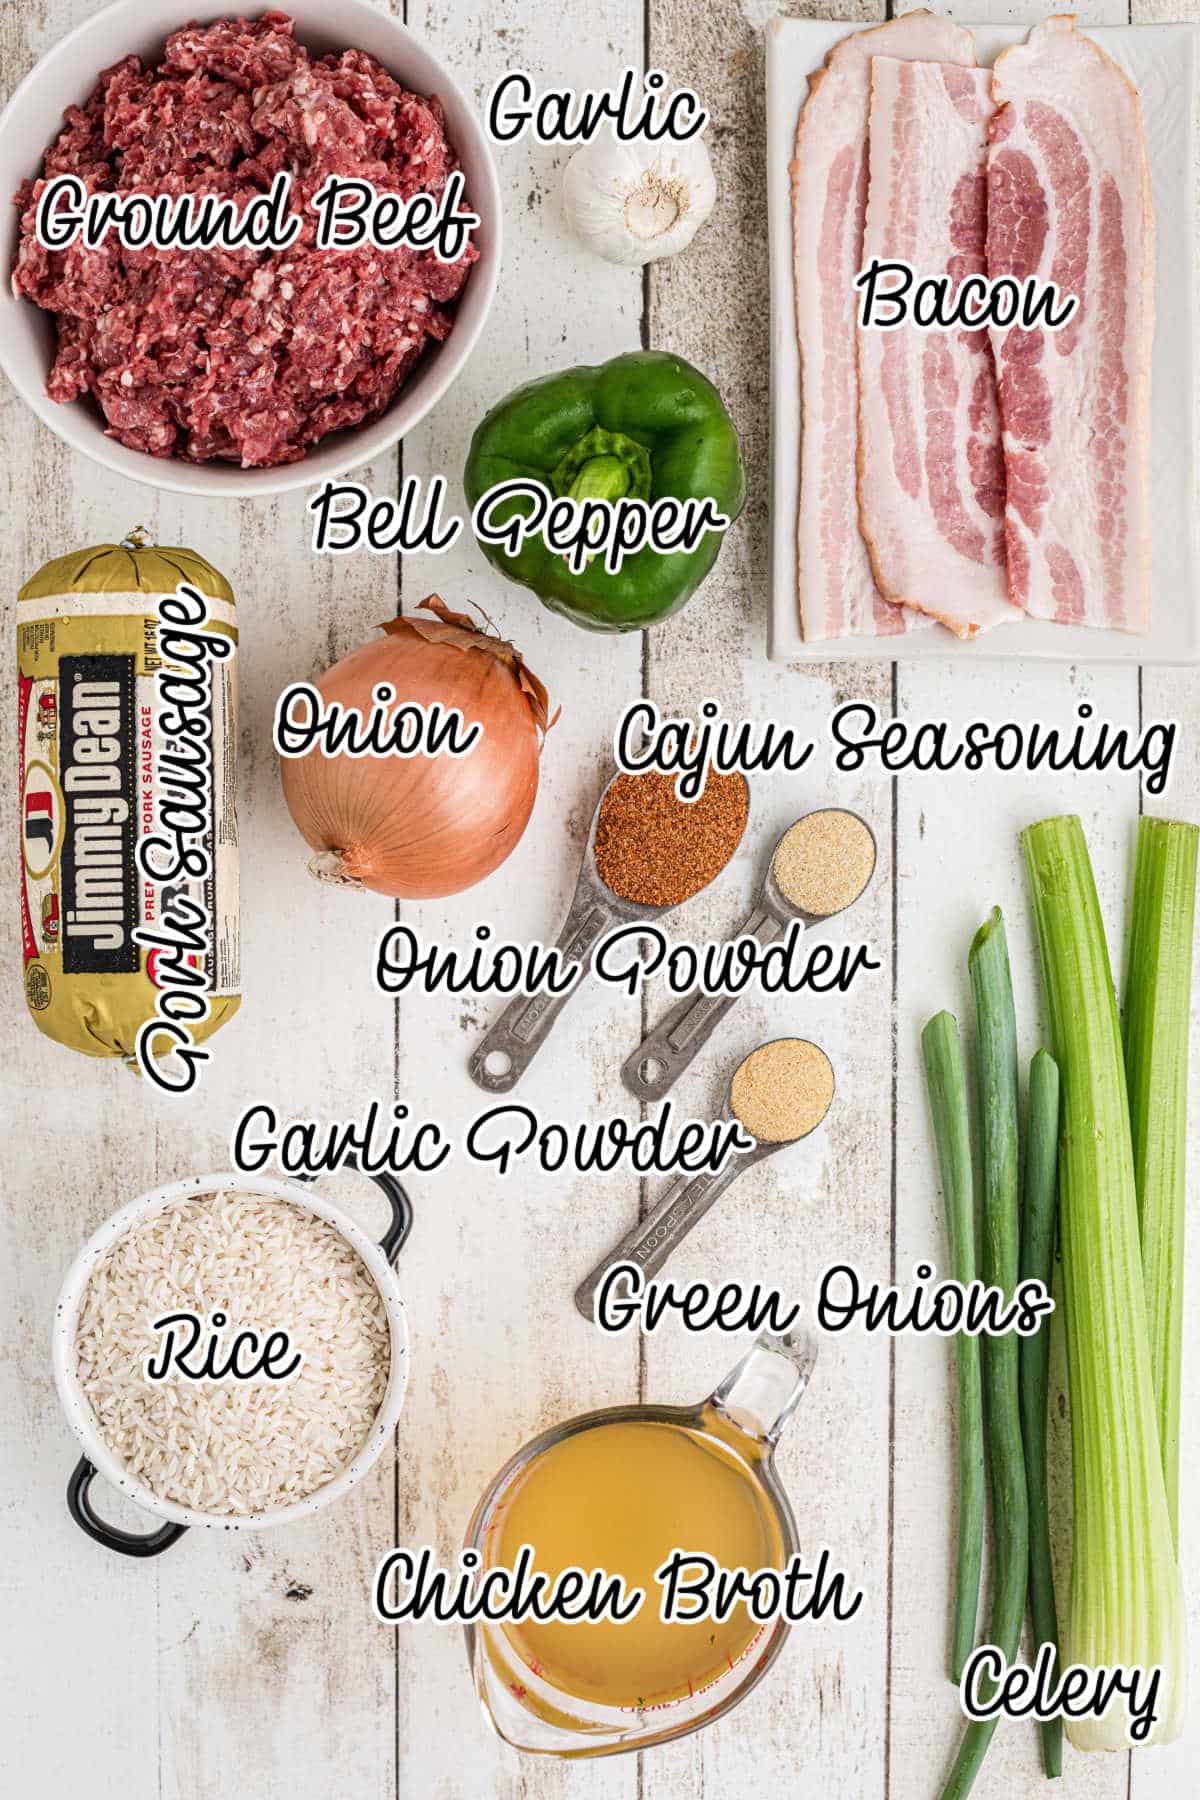 Ingredients laid out showing what is needed to make dirty rice, with text overlay.